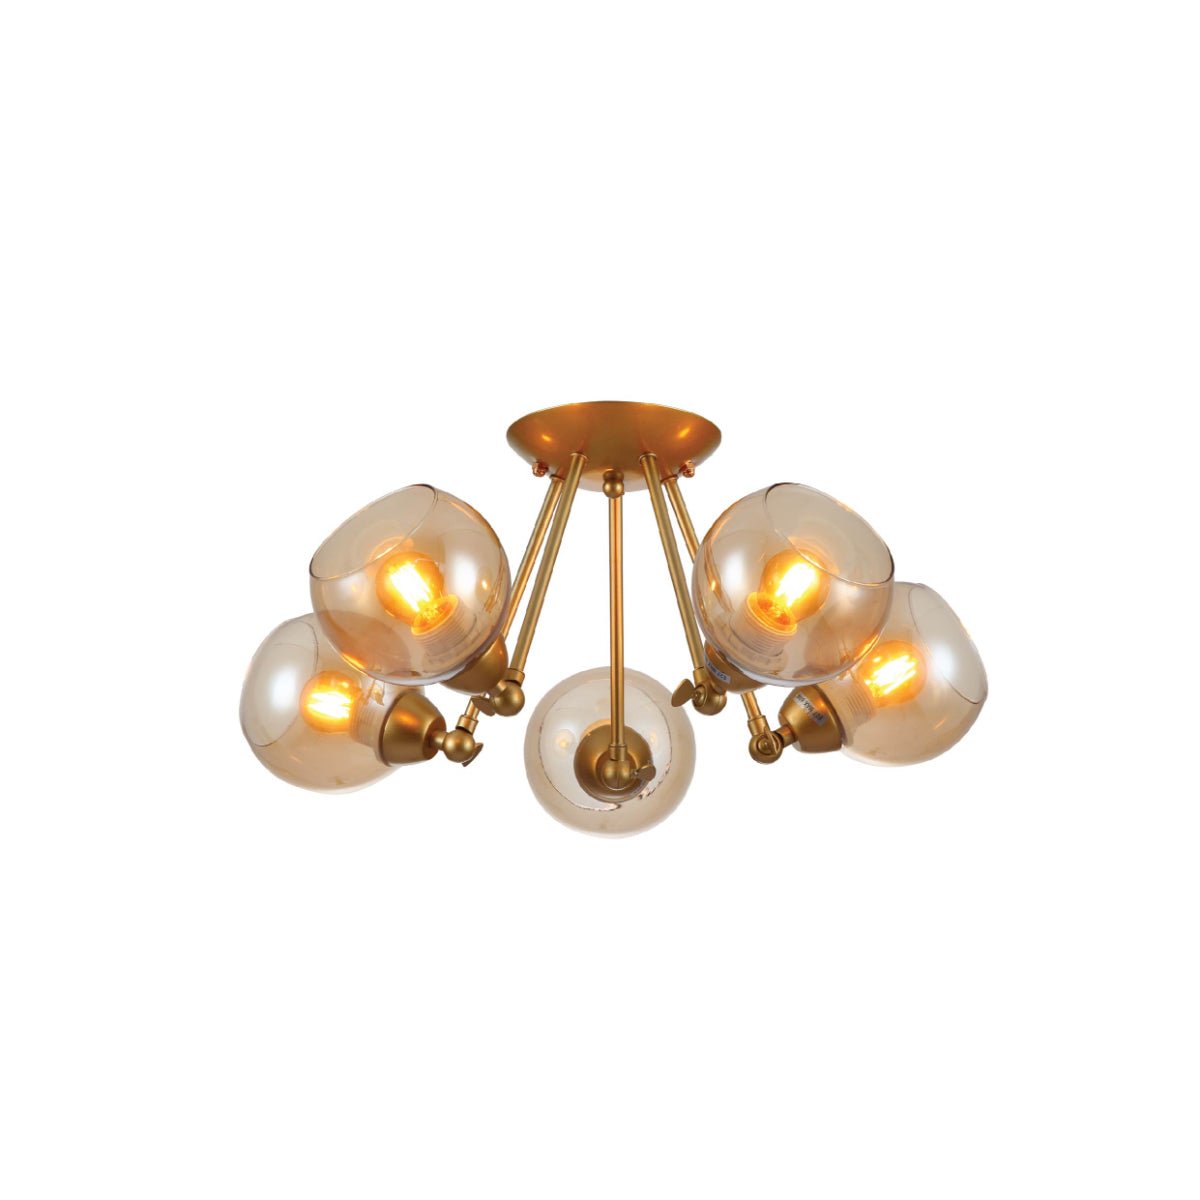 Main image of Gold Hinged Metal Amber Dome Glass Ceiling Light with E27 Fittings | TEKLED 159-17650